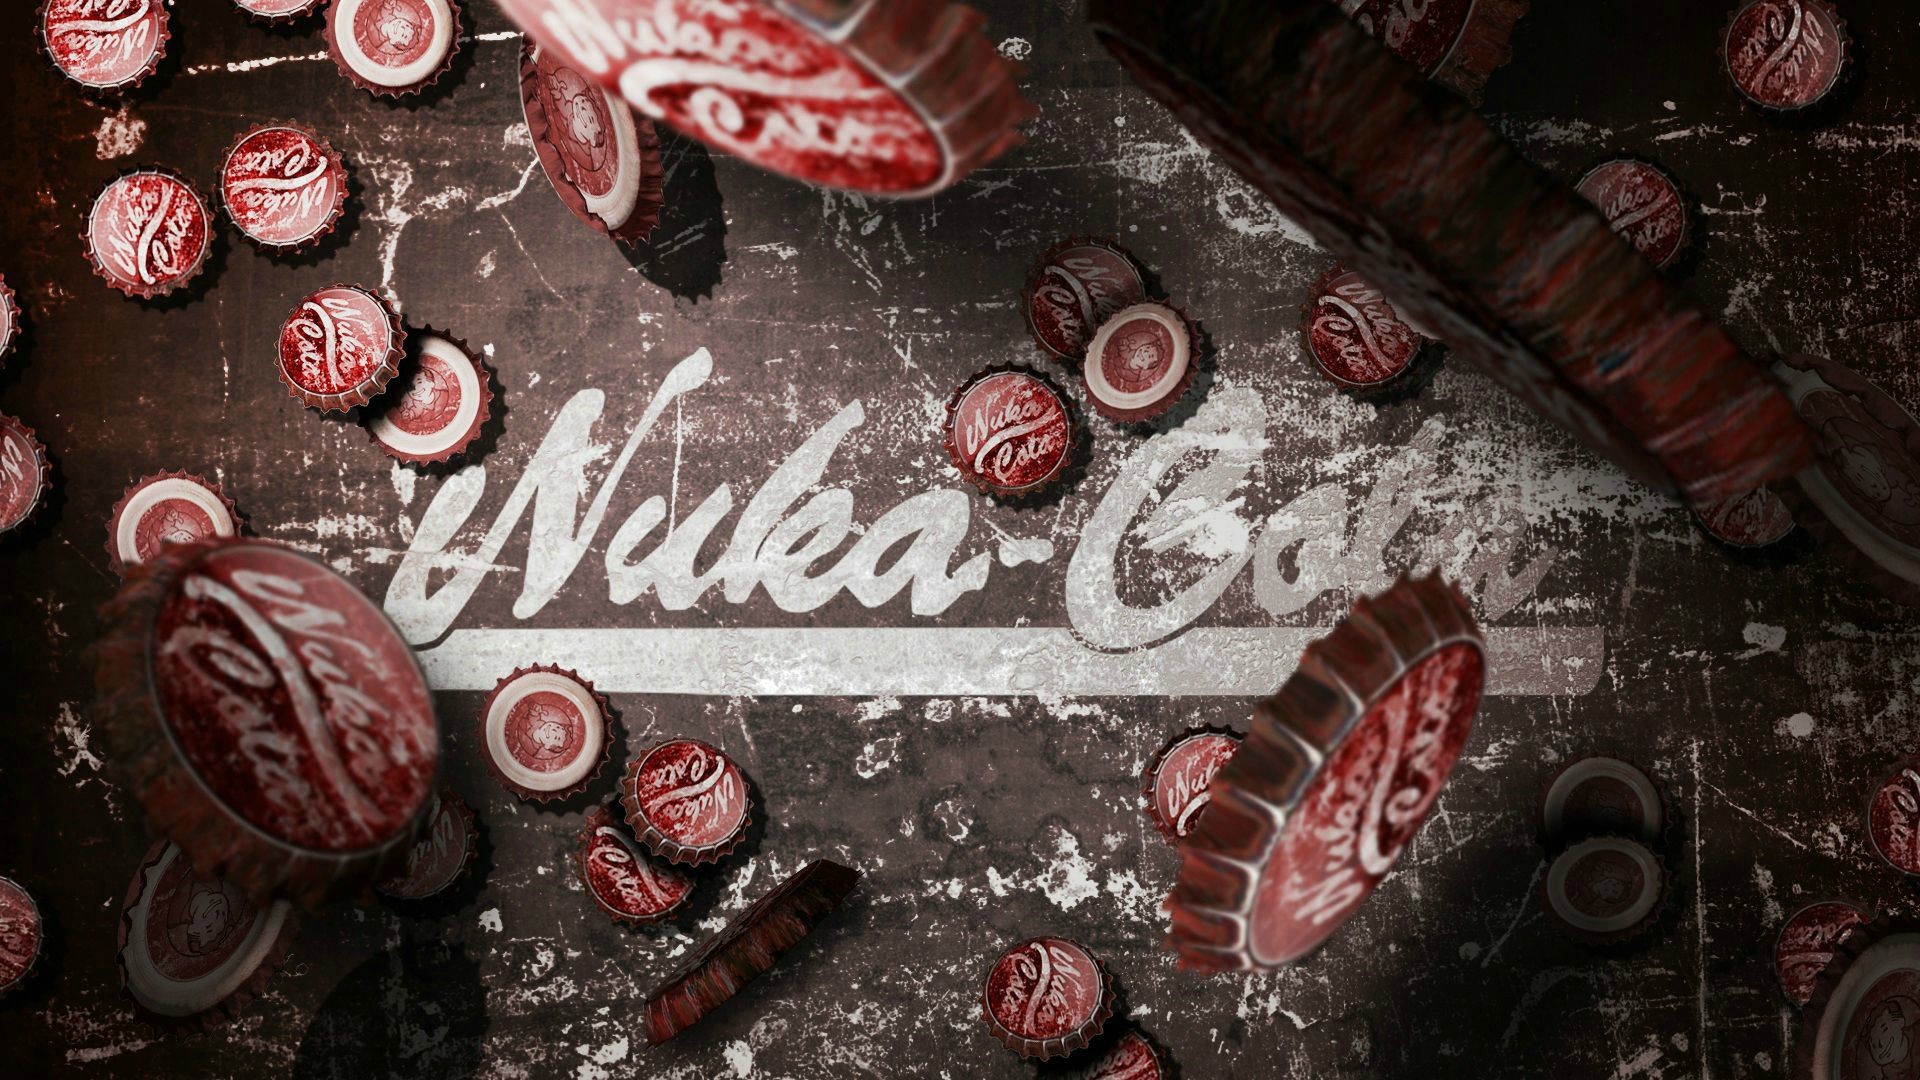 General 1920x1080 Fallout Fallout: New Vegas Nuka Cola video games PC gaming video game art Bottle Tops